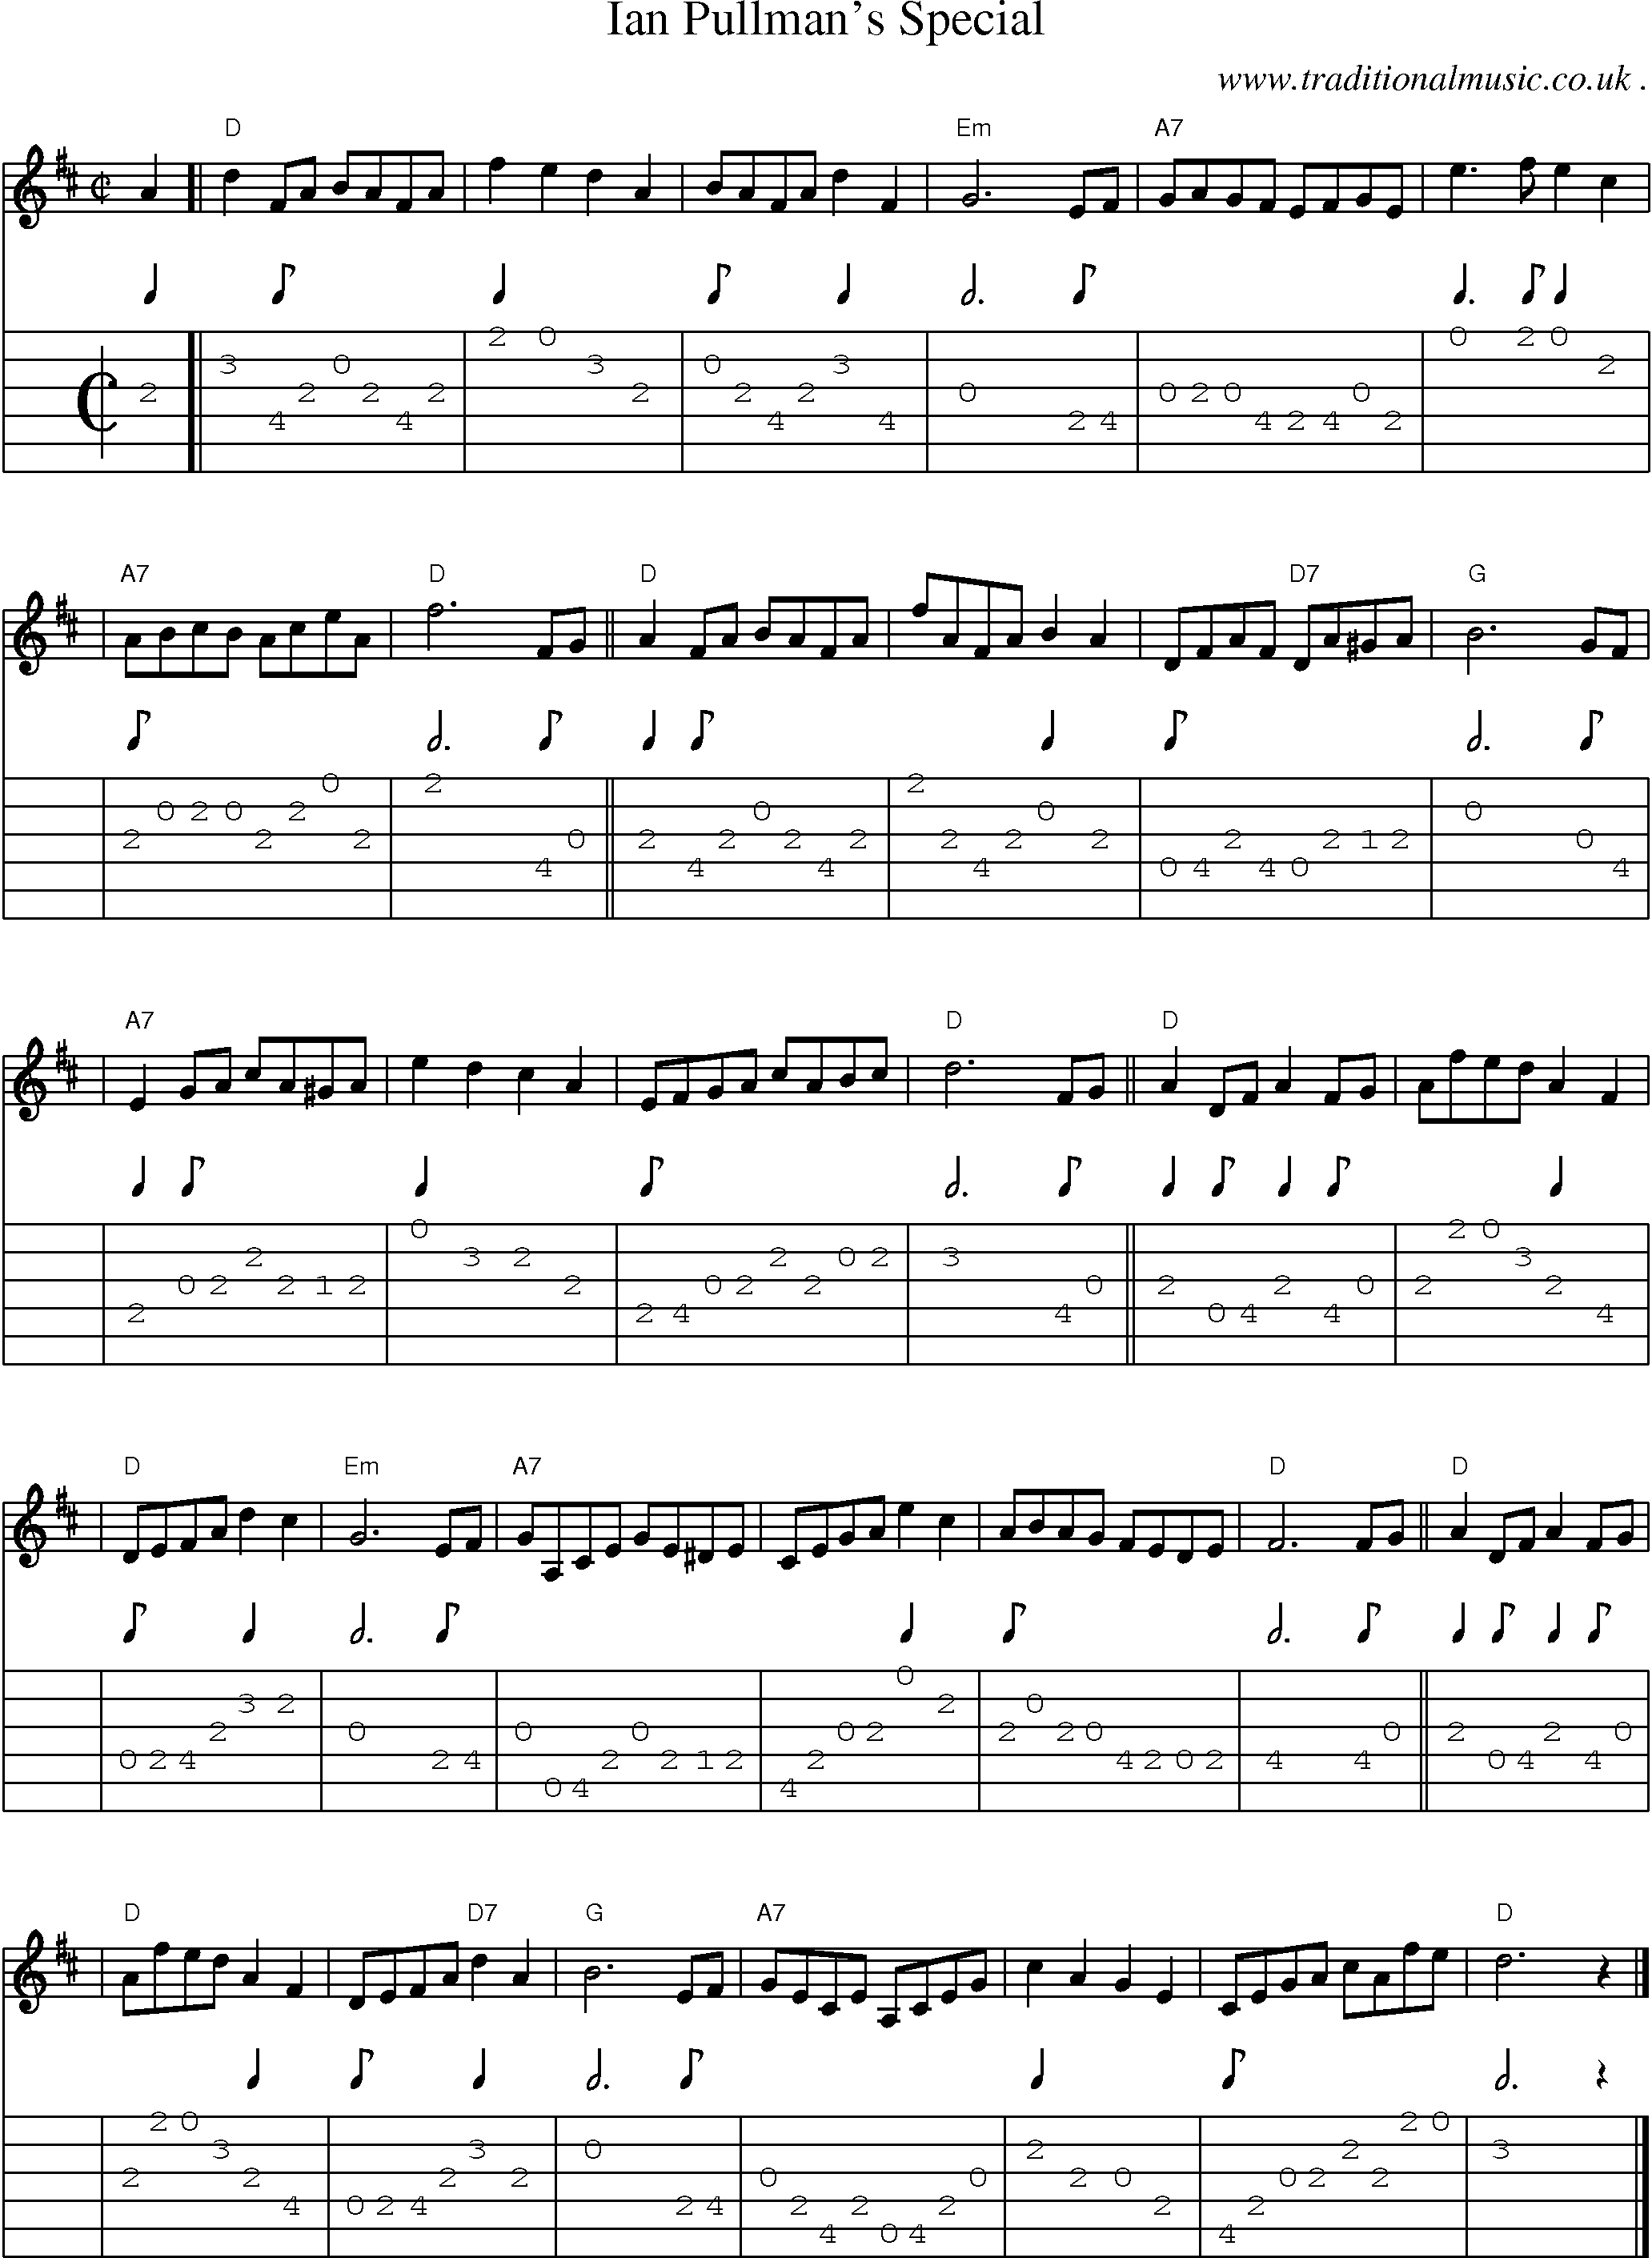 Sheet-music  score, Chords and Guitar Tabs for Ian Pullmans Special